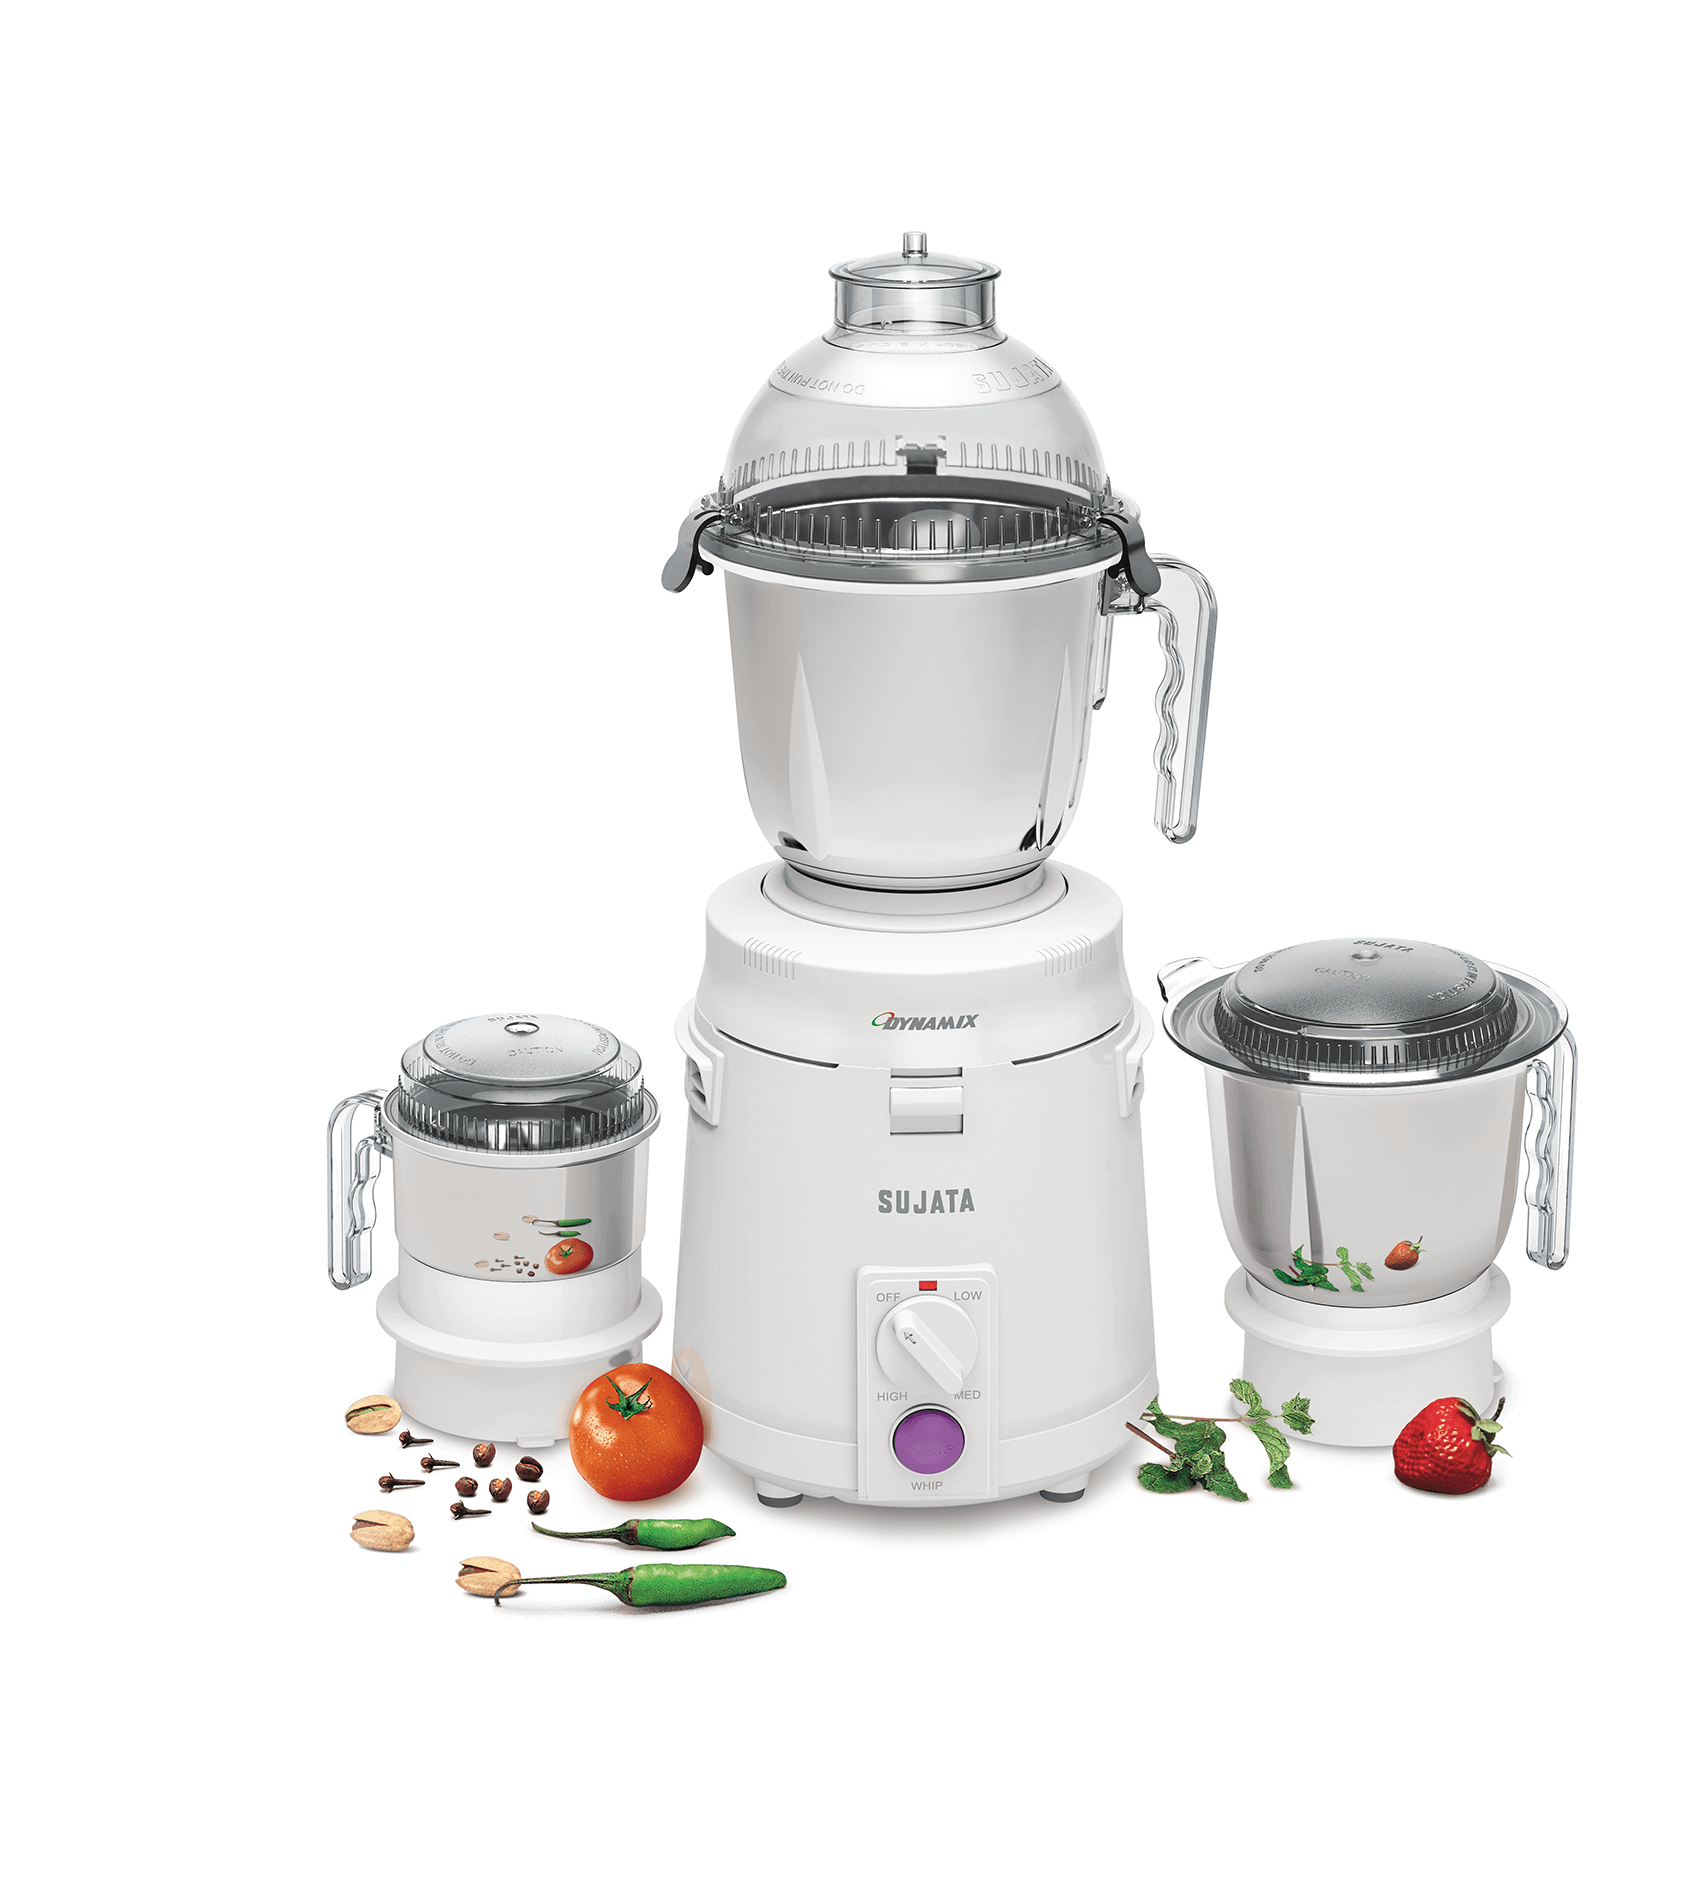 Best Mixer Grinder Company in India 